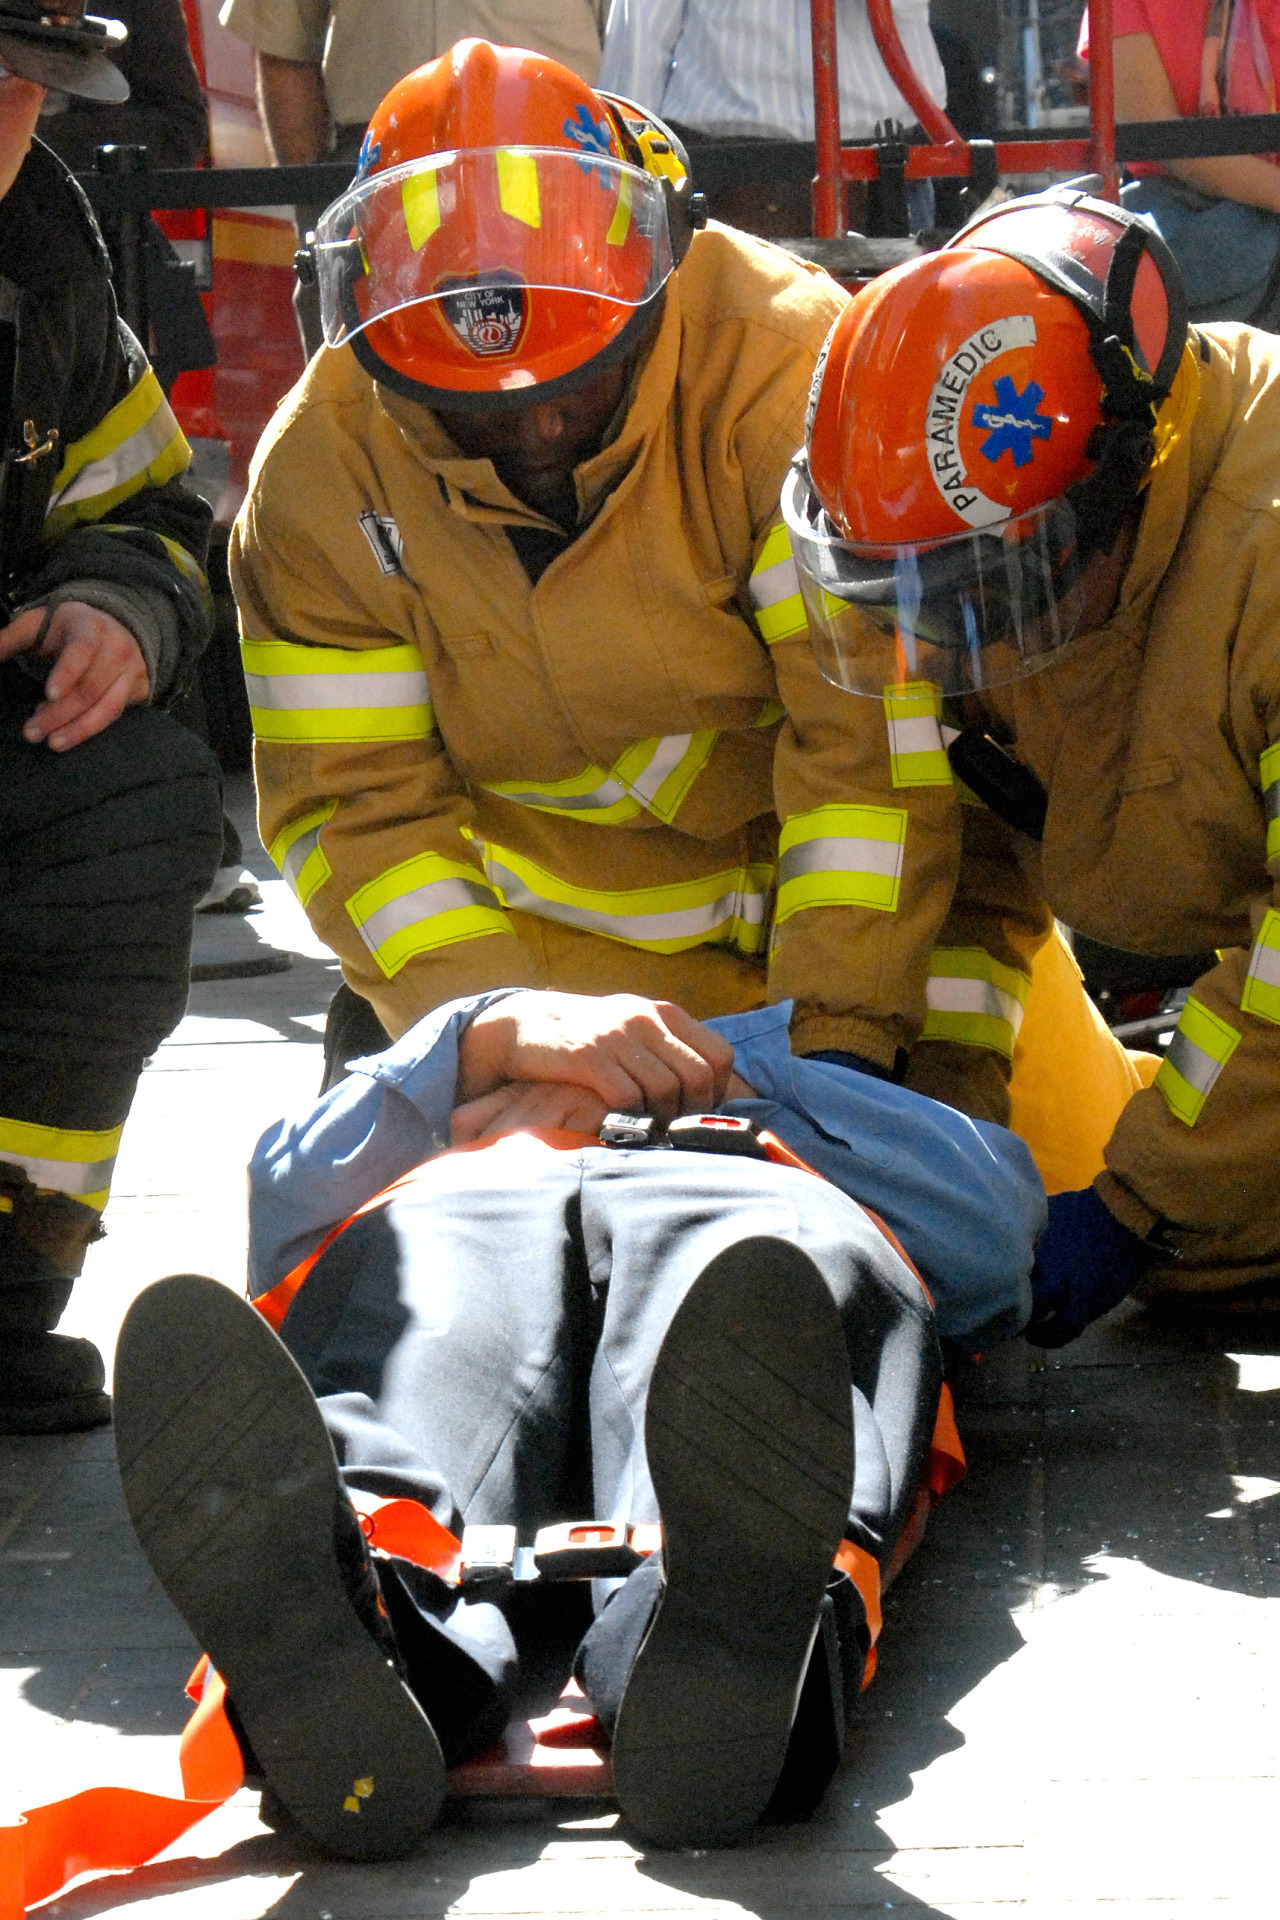 FDNY EMS members package a patient during a demonstration in Rockefeller Center, 2006.